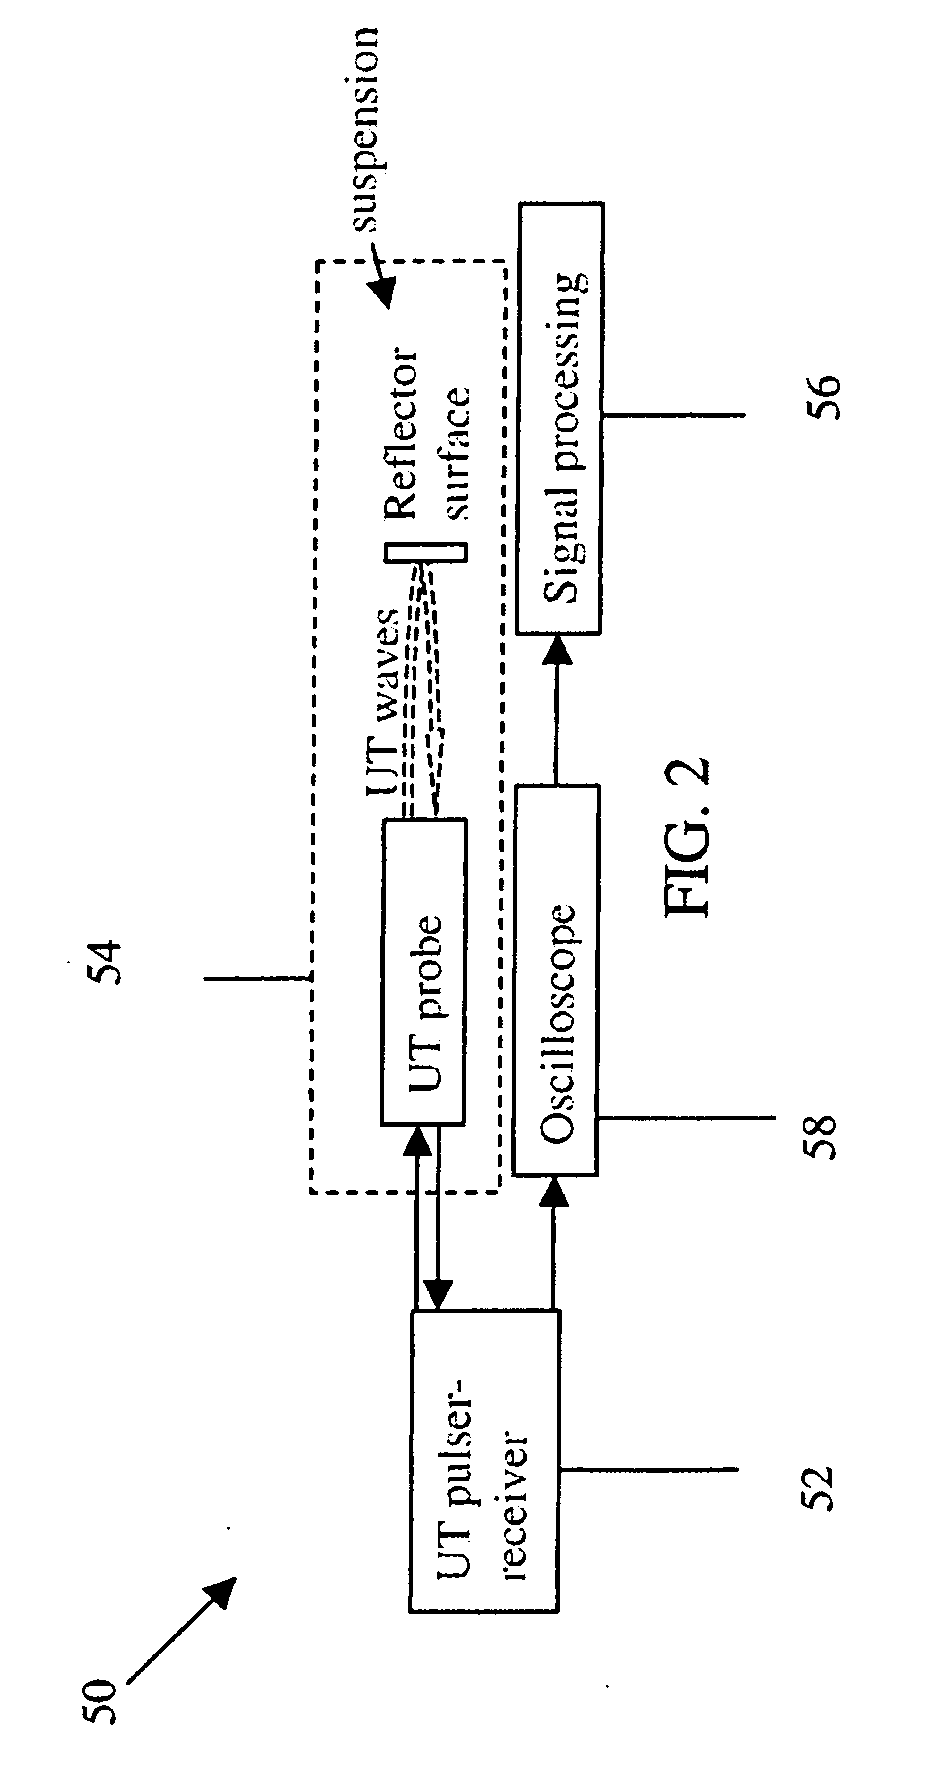 Devices, methods and systems for measuring one or more characteristics of a biomaterial in a suspension